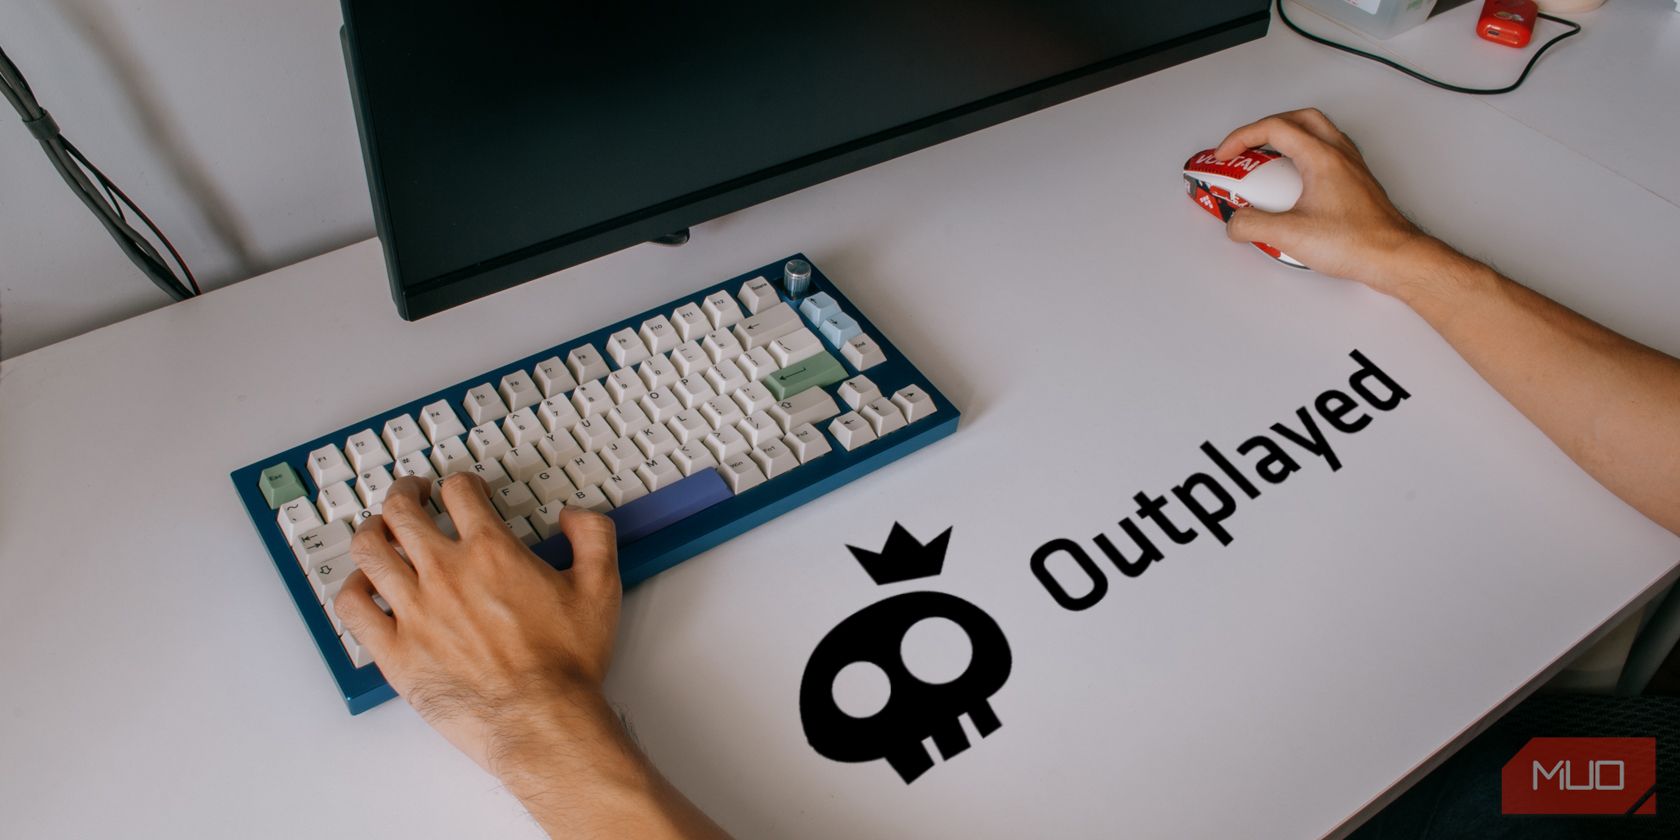 Outplayed logo on desk with mouse and keyboard